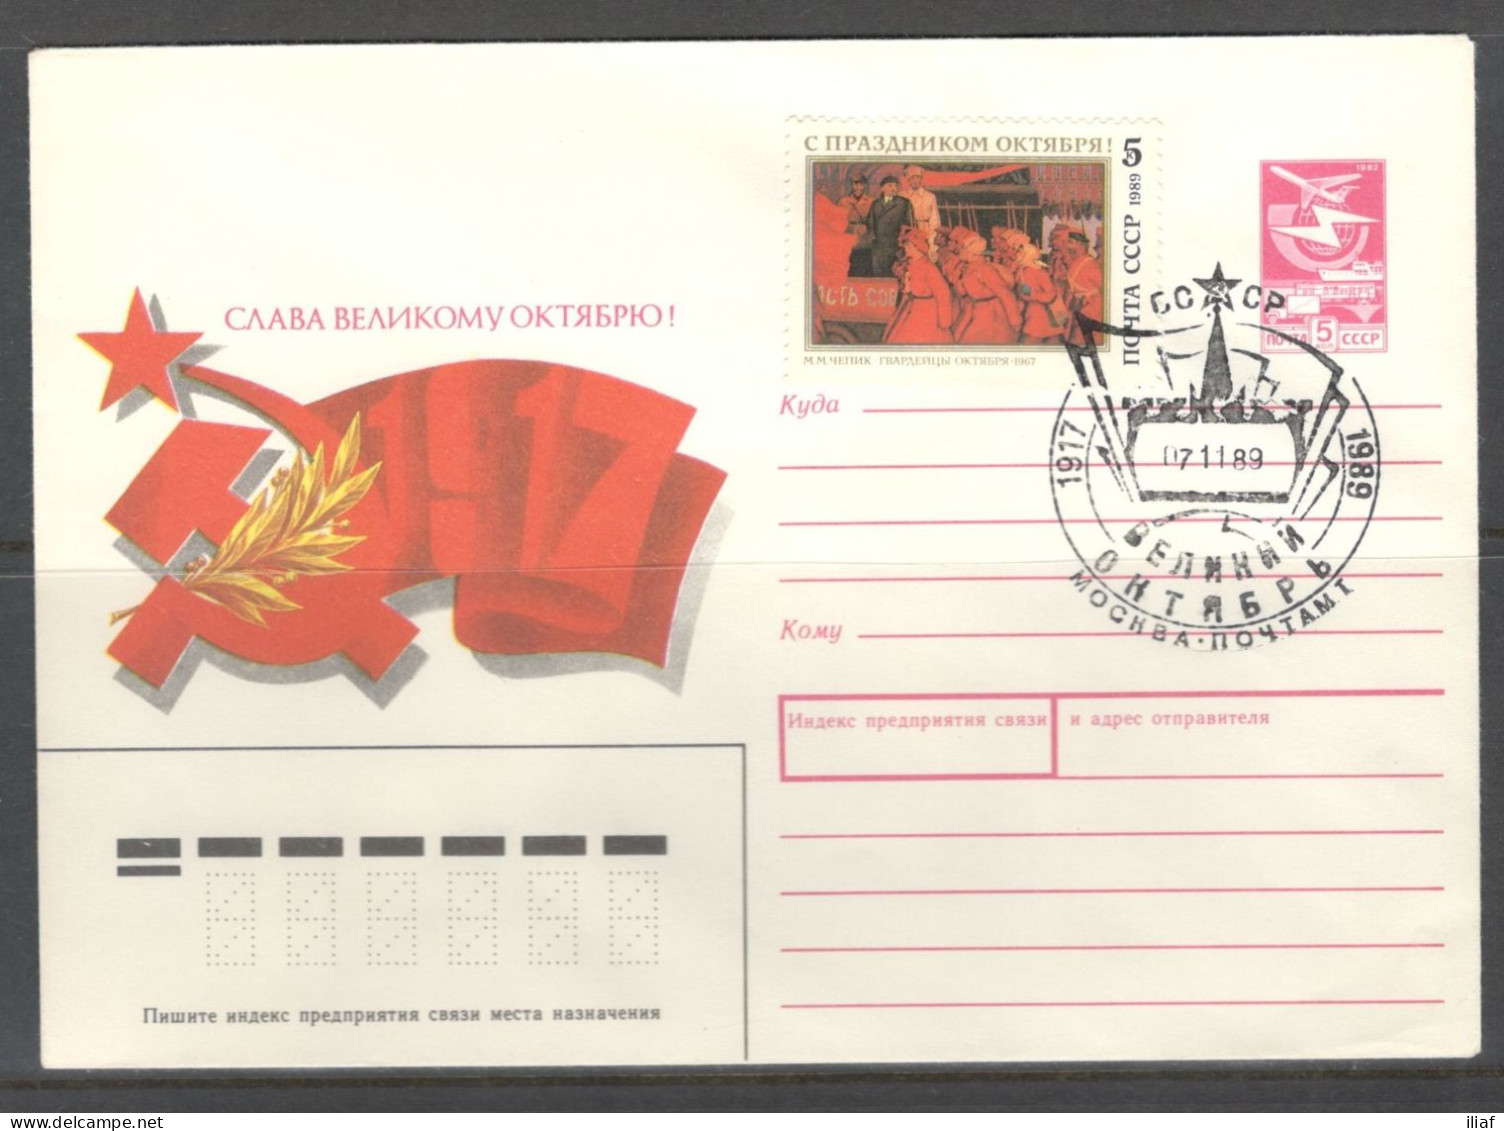 RUSSIA & USSR. 72th Anniversary Of The October Revolution.  Illustrated Envelope With Special Cancellation - Covers & Documents